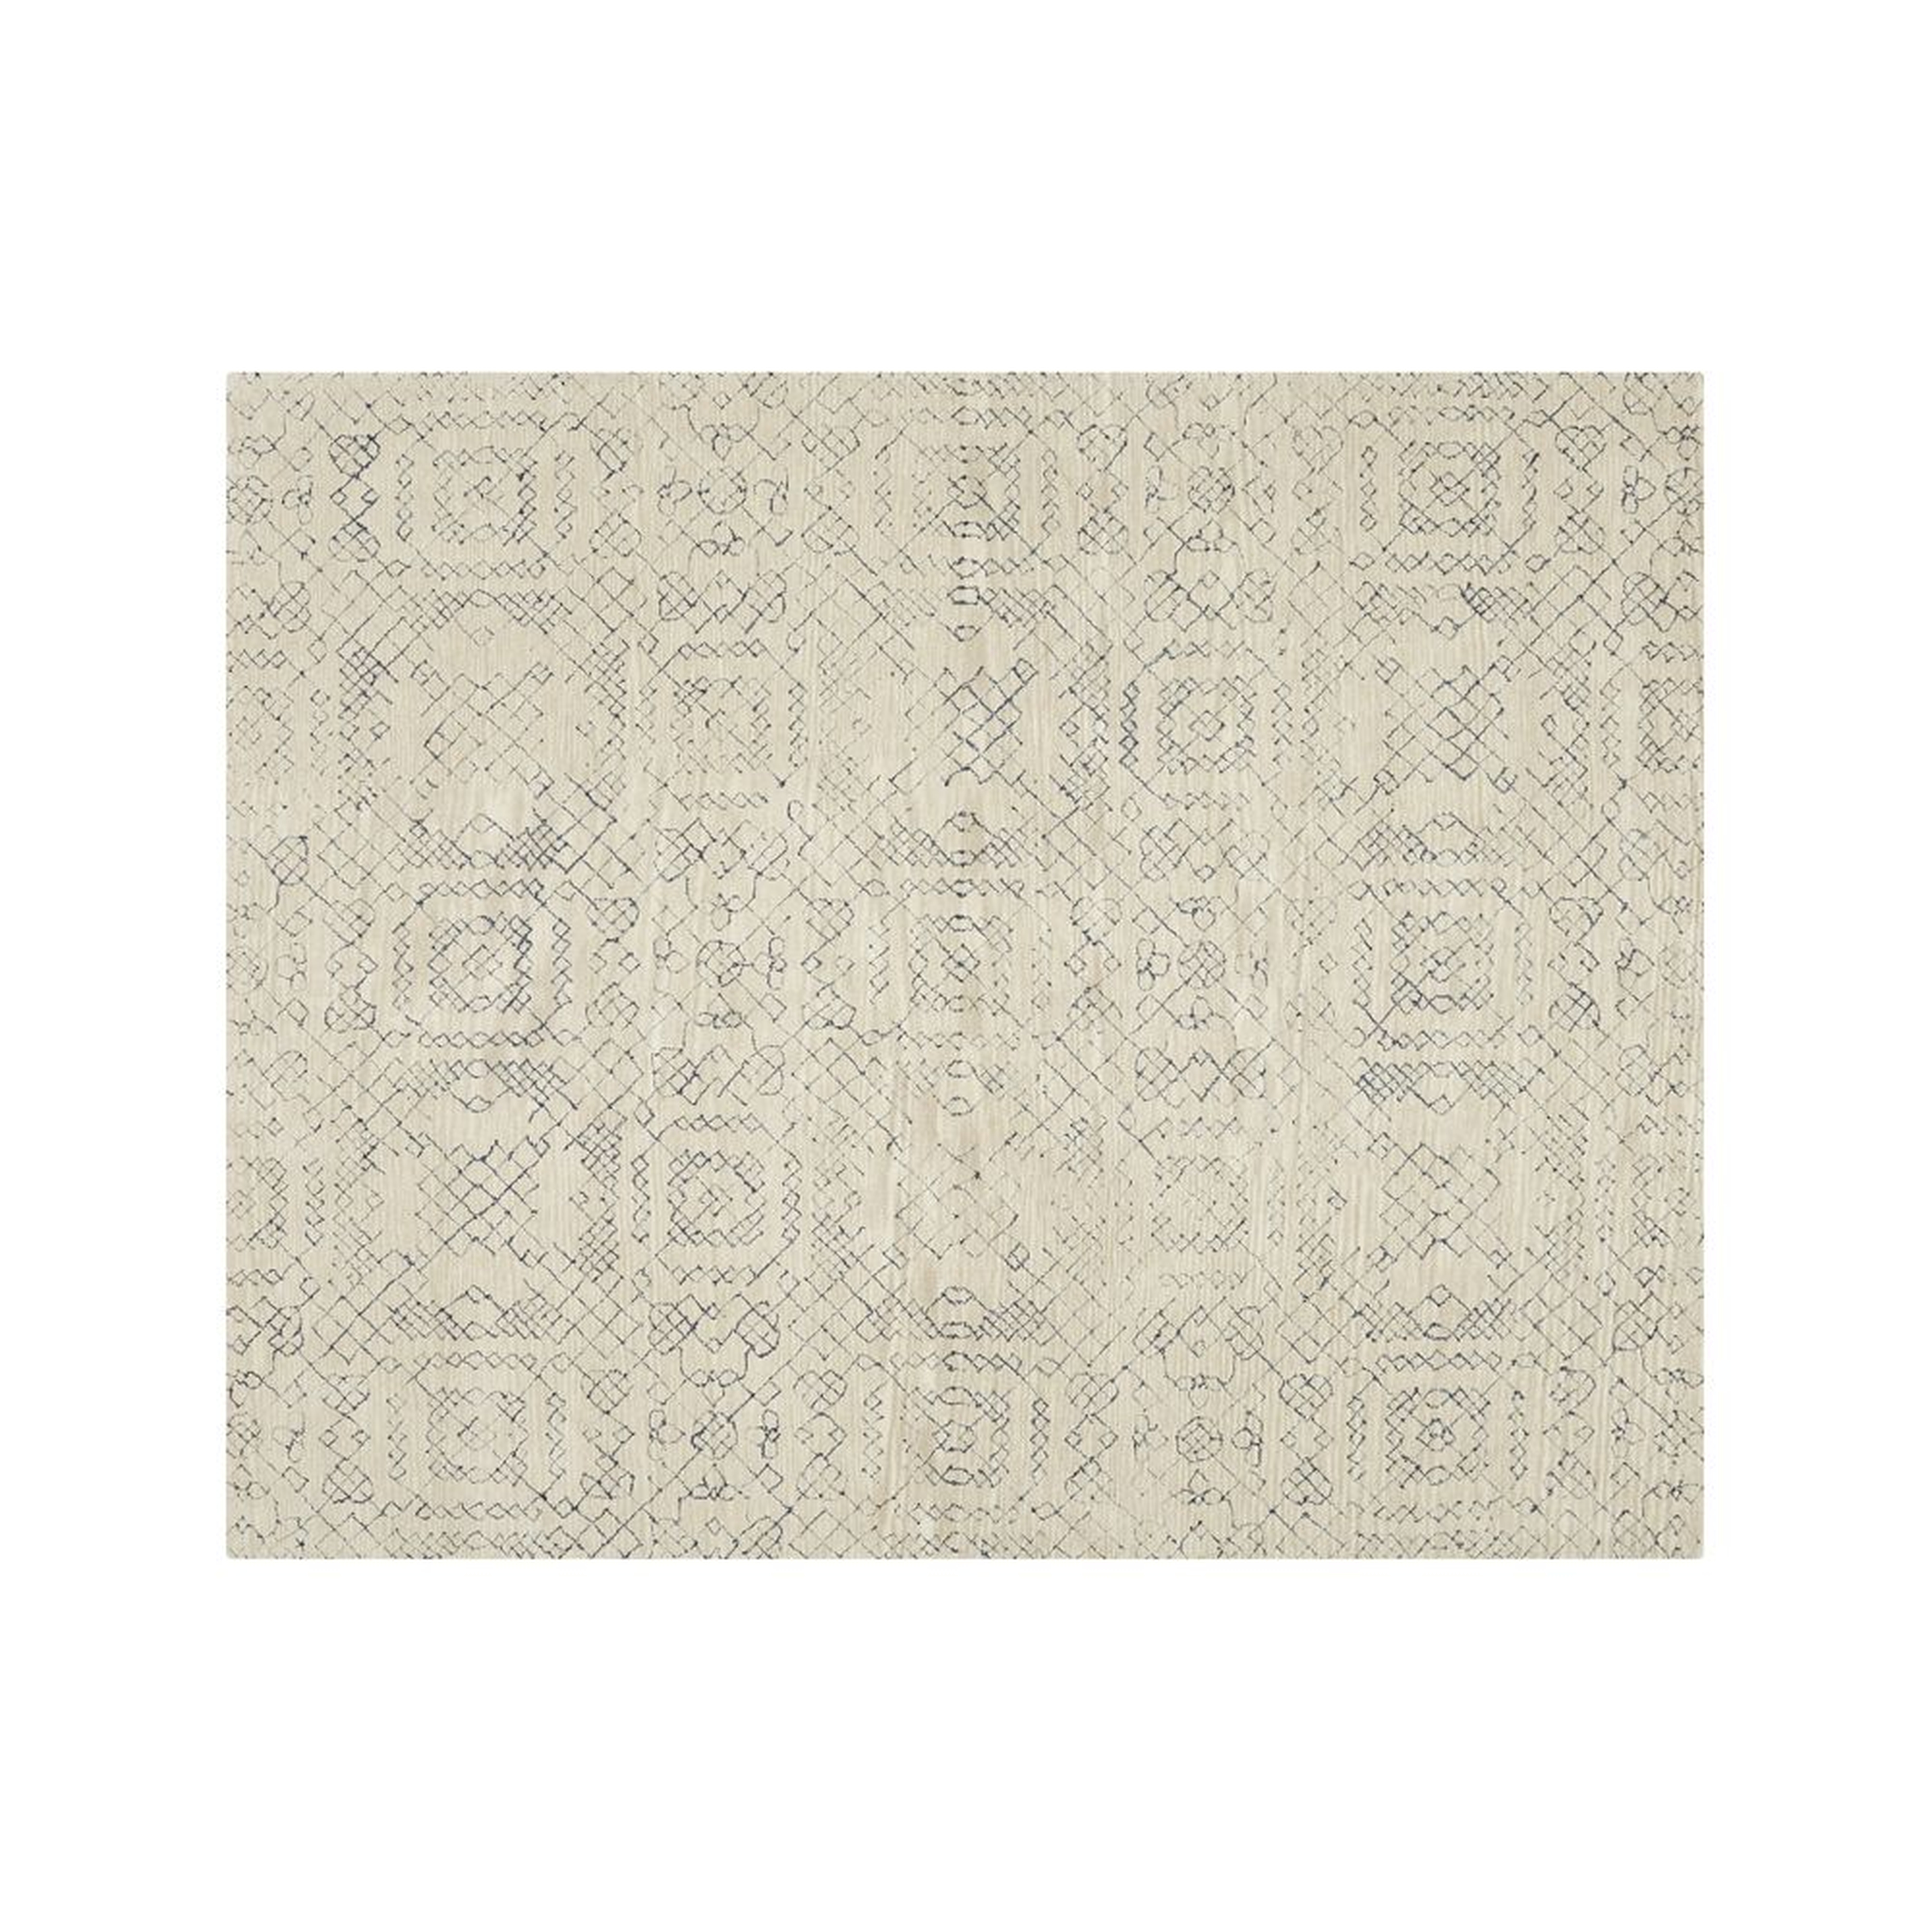 Azulejo Neutral Moroccan Style Area Rug 8'x10' - Crate and Barrel